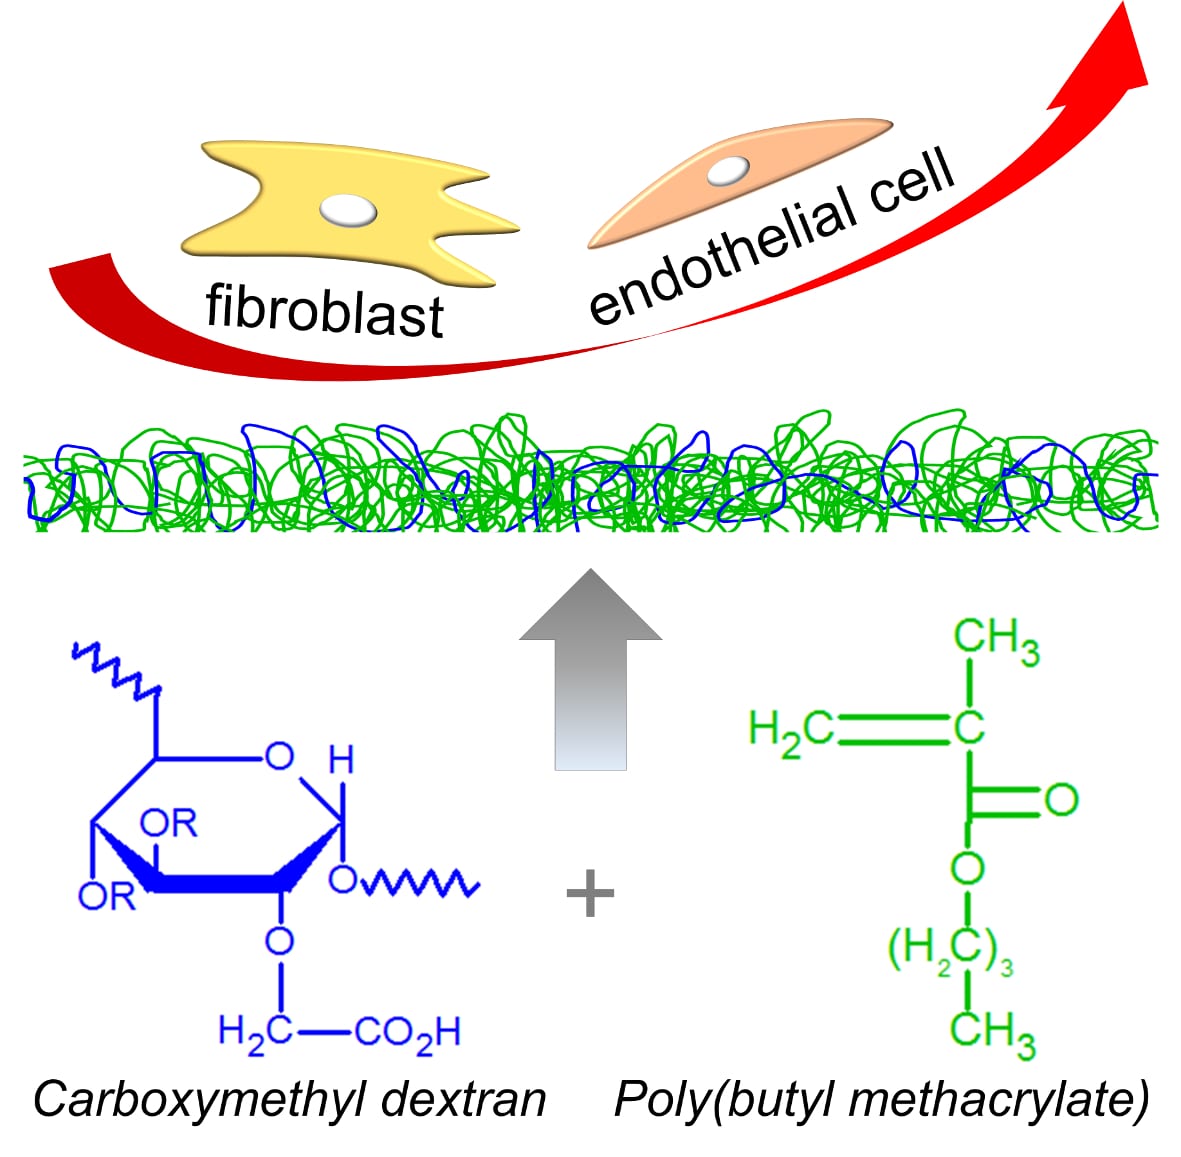 Poly(Butyl Methacrylate) and Carboxymethyl Dextran Copolymers: Synthesis, Mechanical and Anti-Adhesive Properties